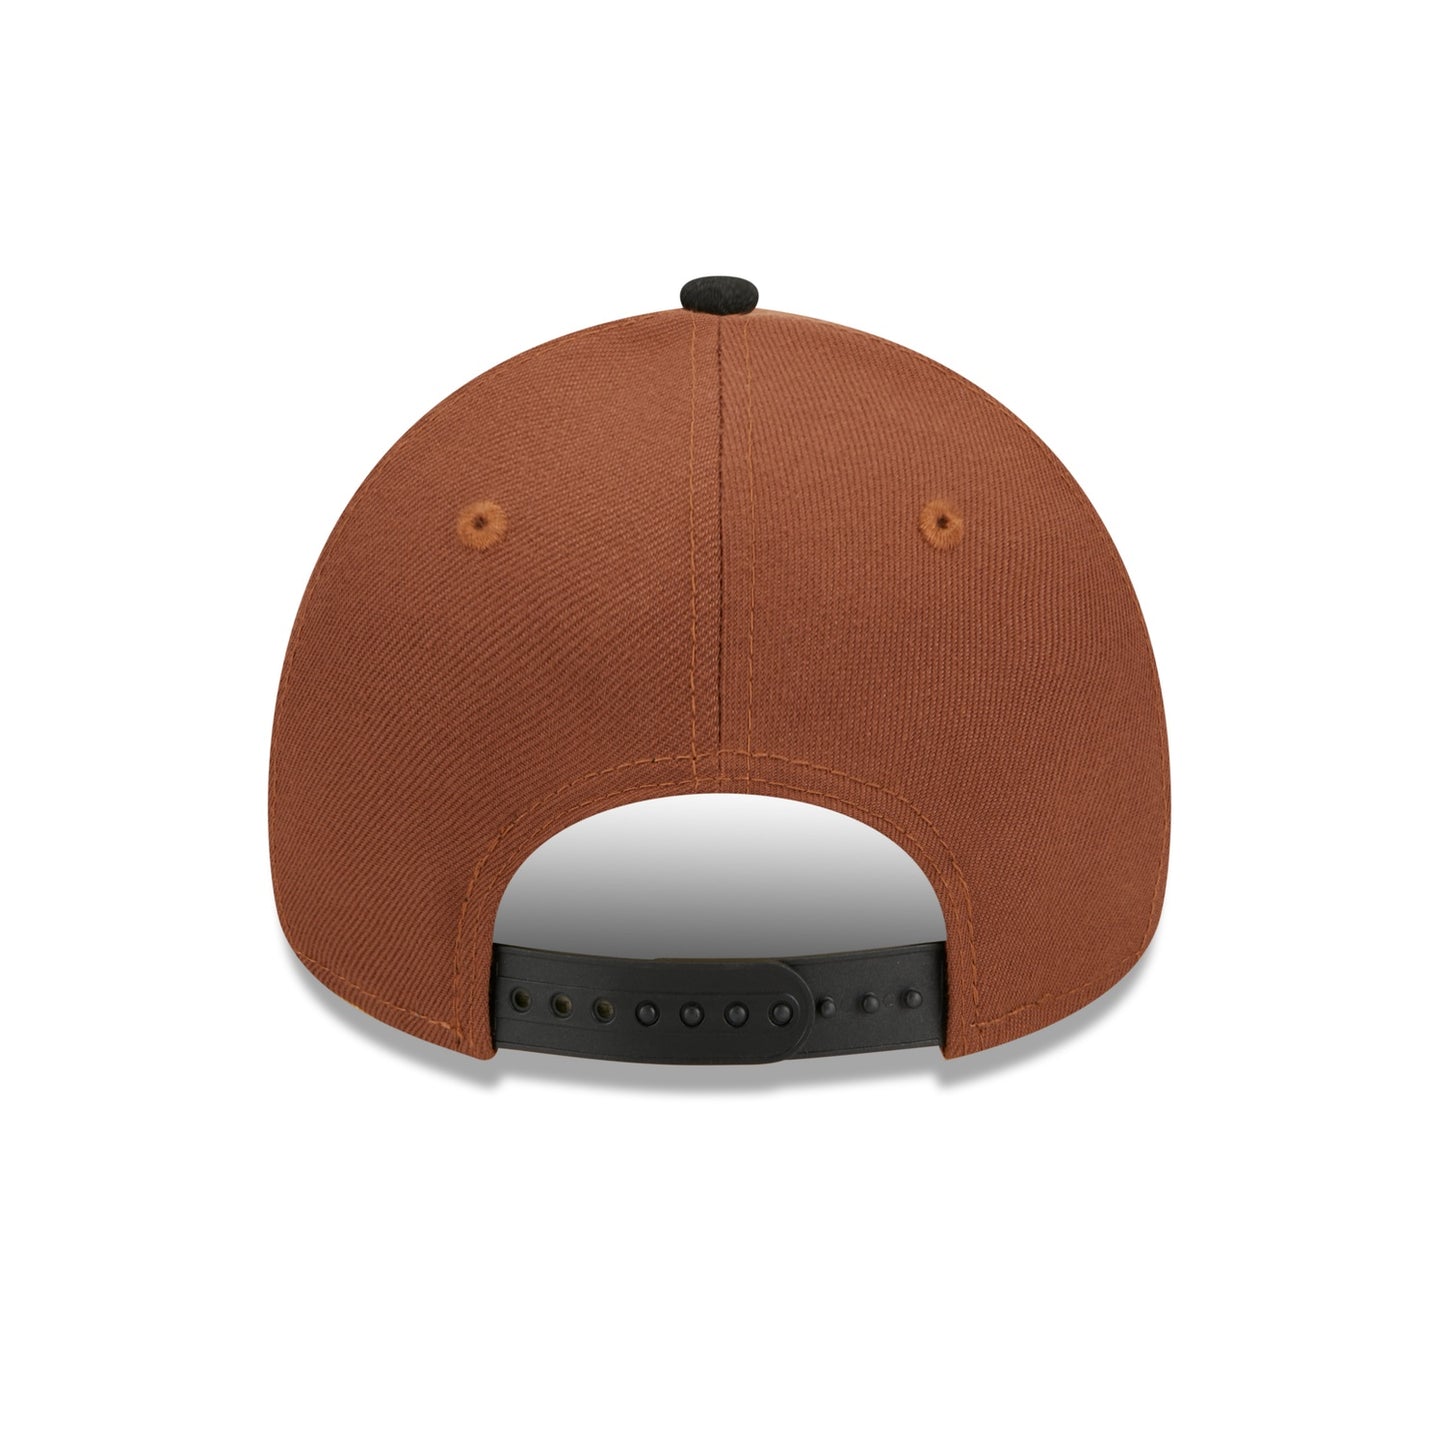 NEW ERA 9FORTY A-FRAME ST. LOUIS BROWNS WORLD SERIES 1944 TWO TONE / GREY UV SNAPBACK